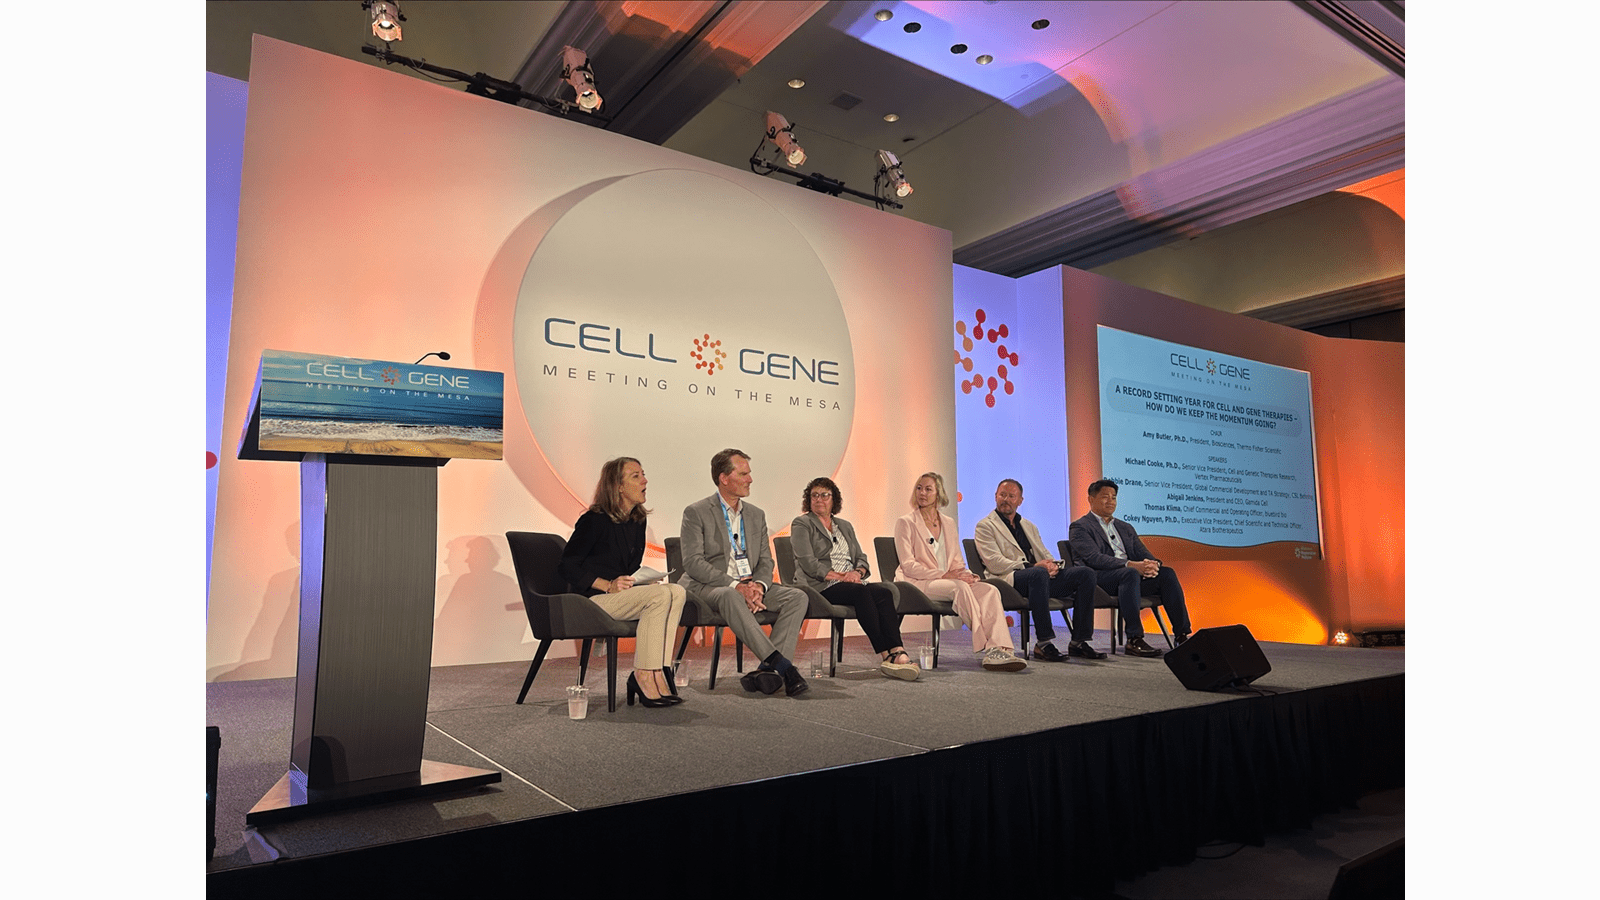 CSL's Debbie Drane appears on a panel at Meeting on the Mesa, a conference on gene and cell therapies.